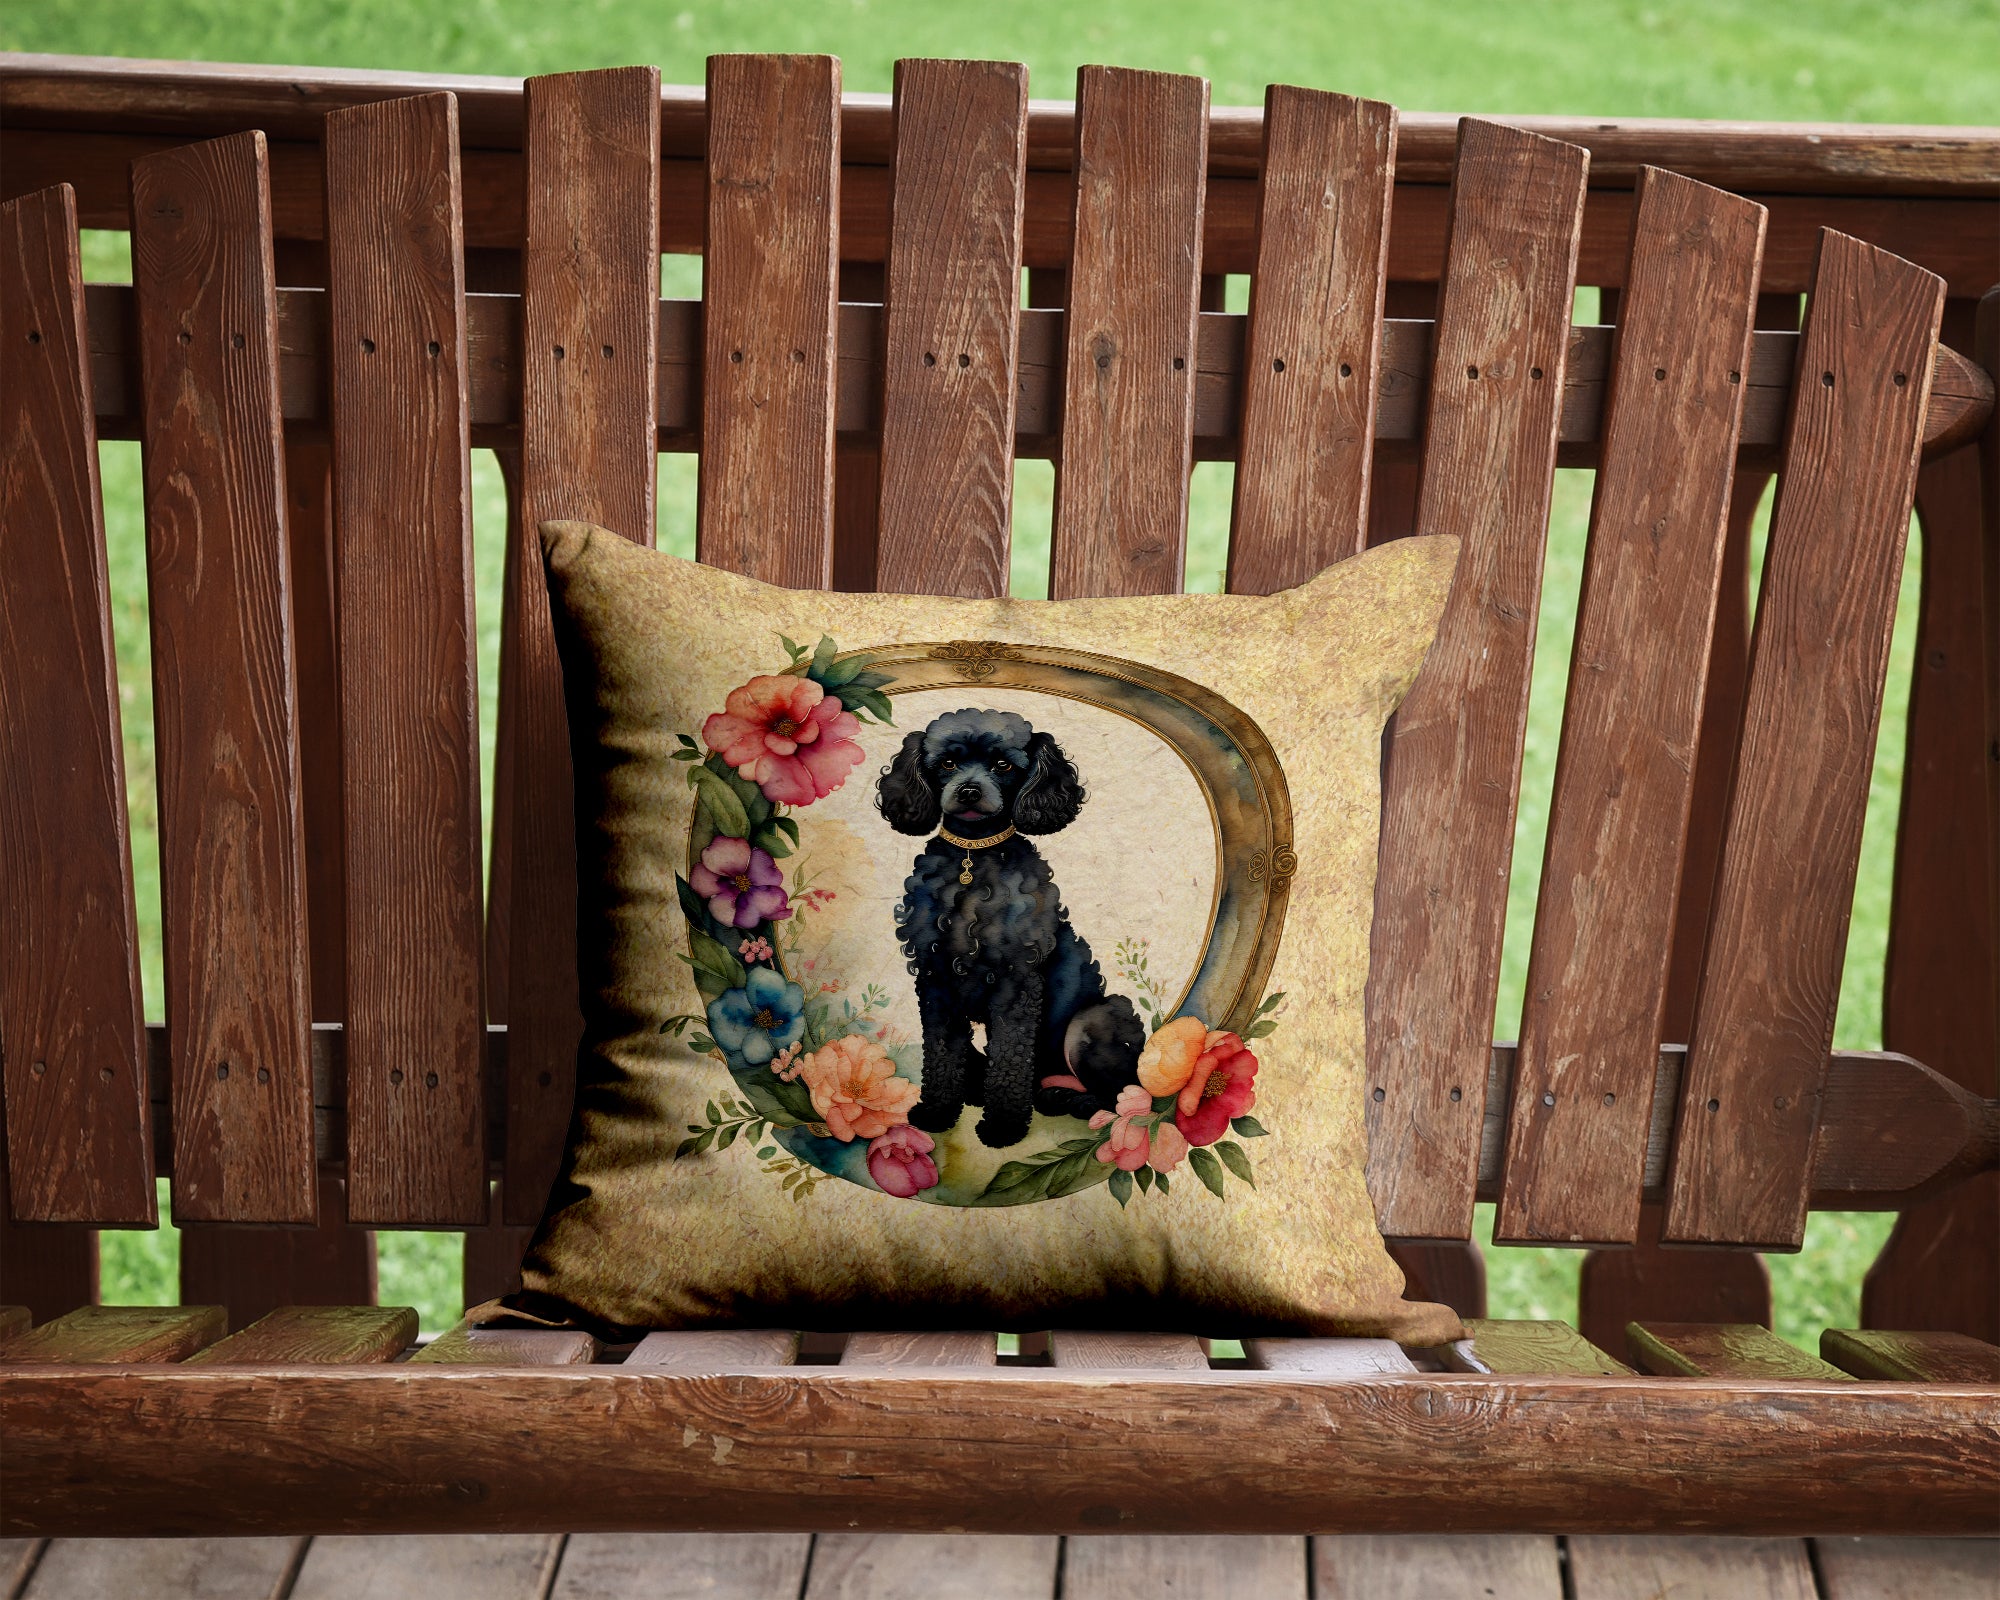 Buy this Black Poodle and Flowers Fabric Decorative Pillow